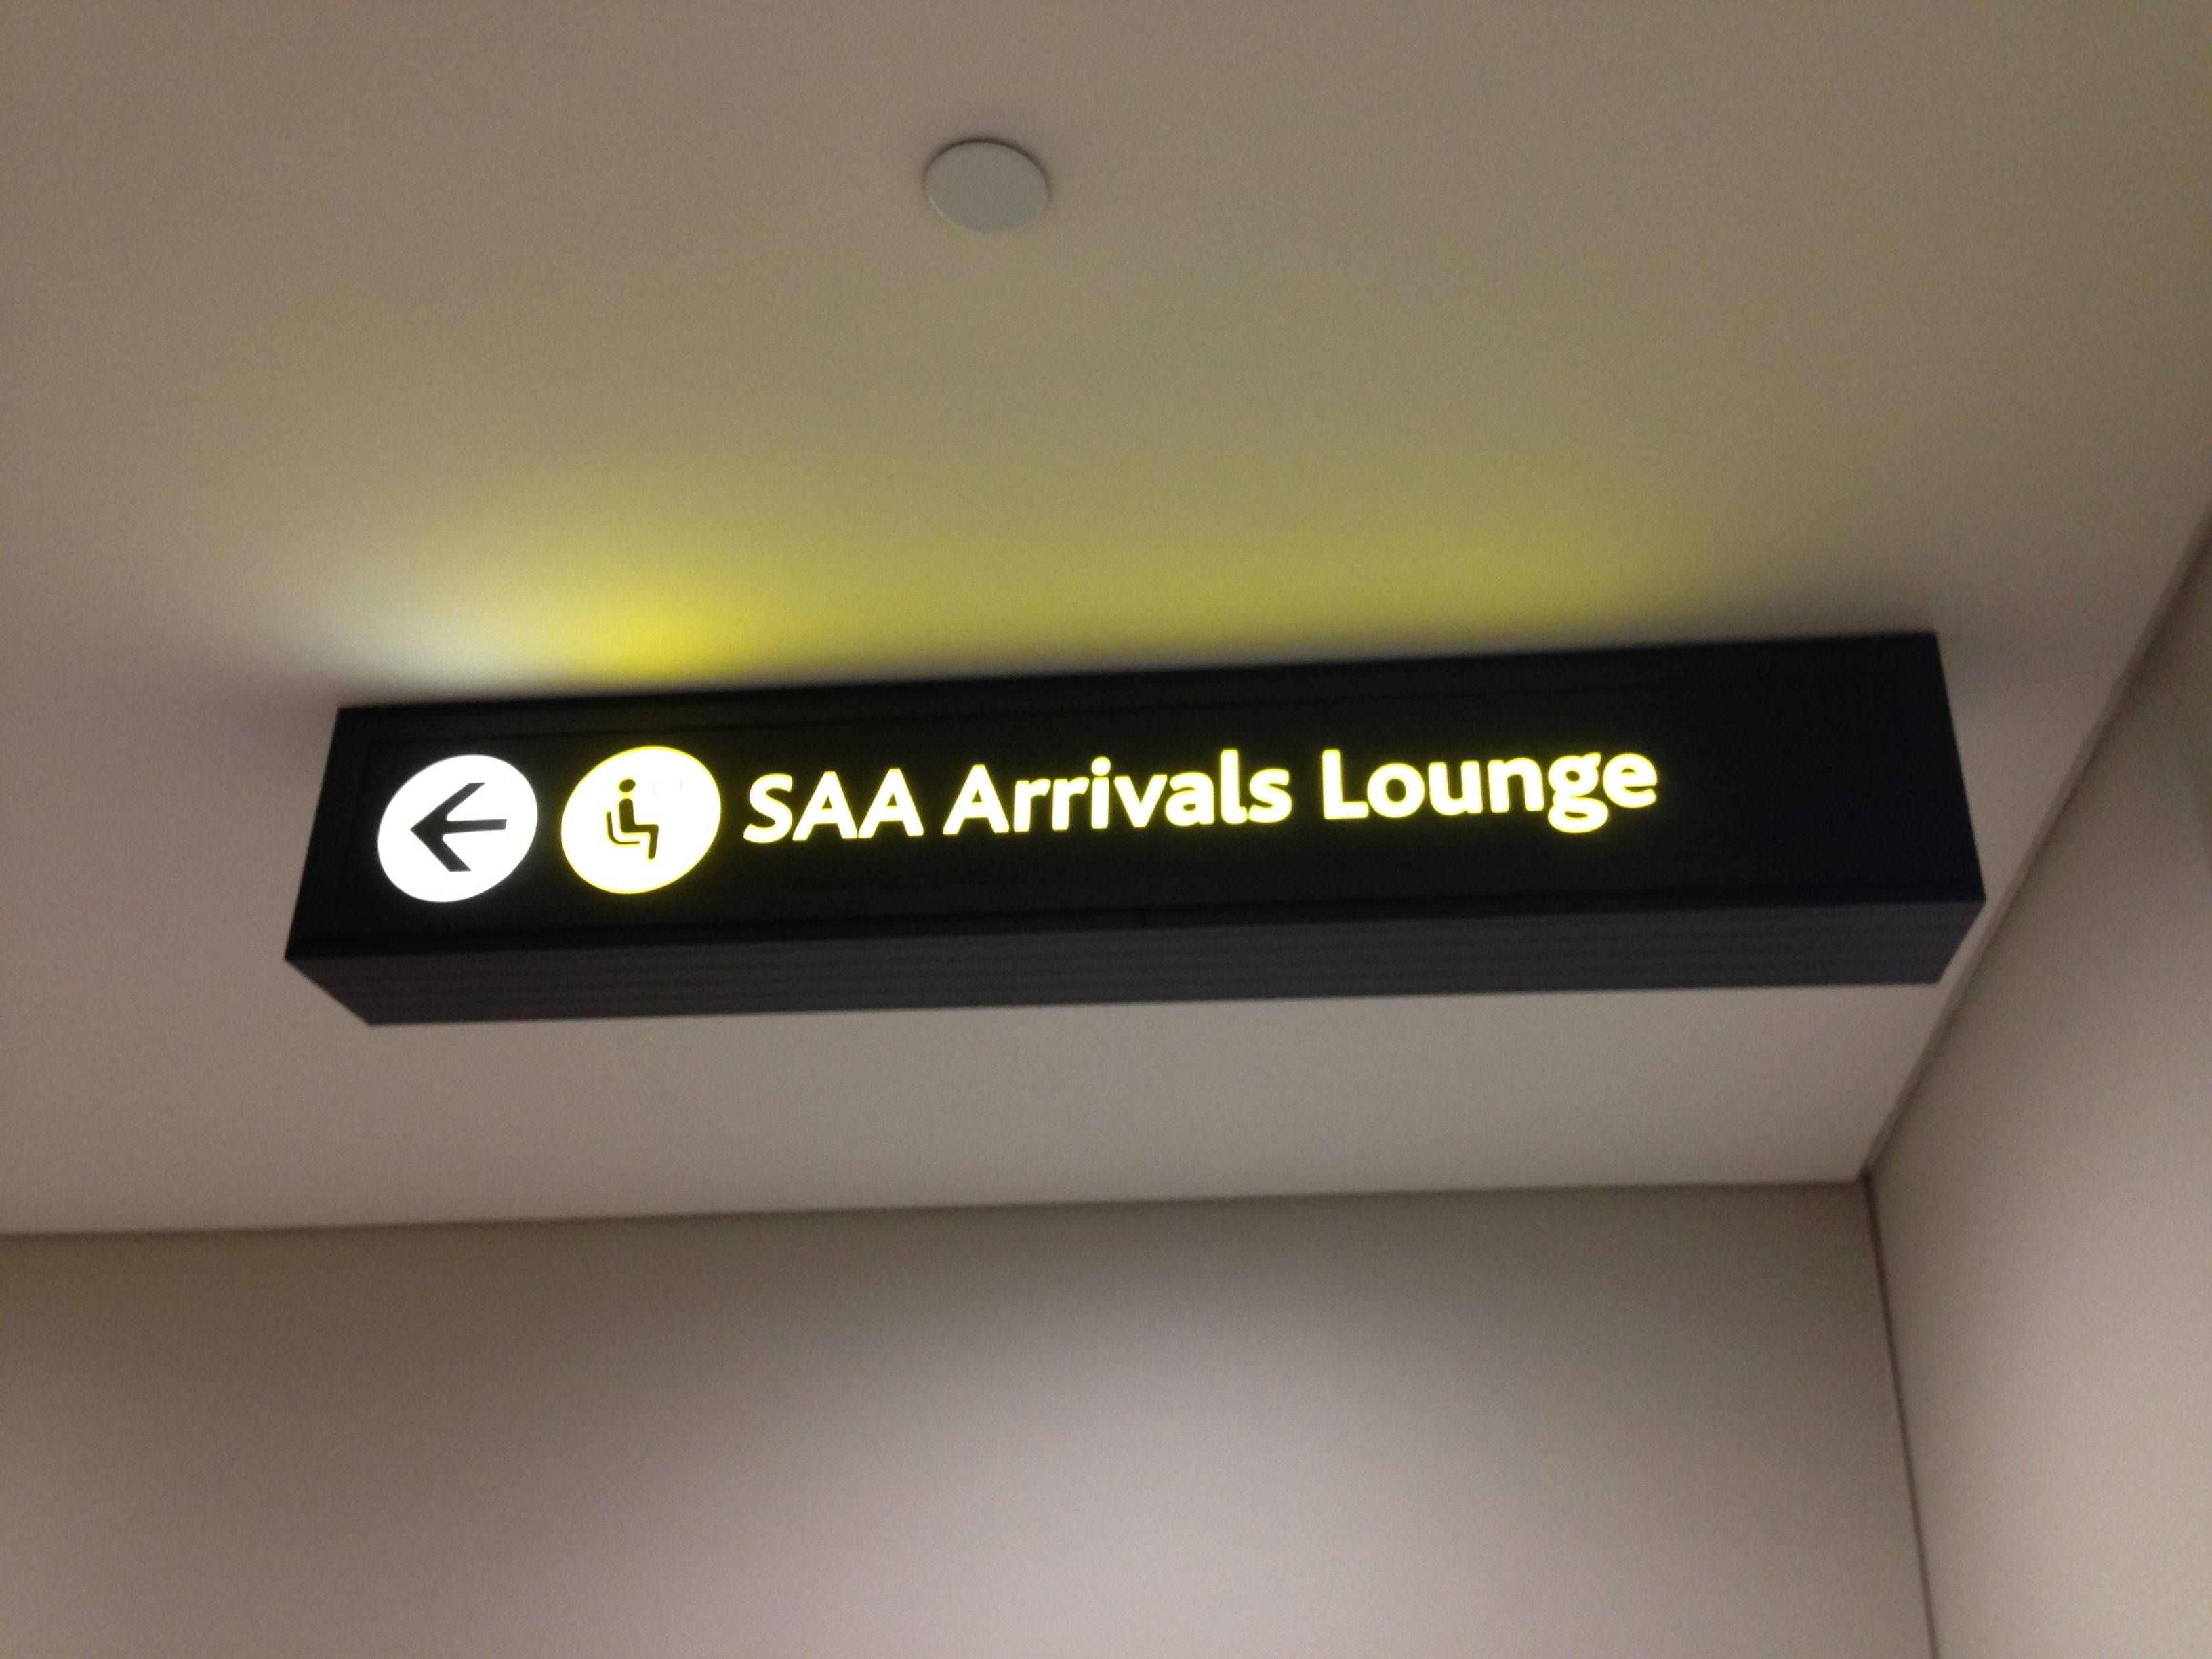 South African Airways Arrival Lounge